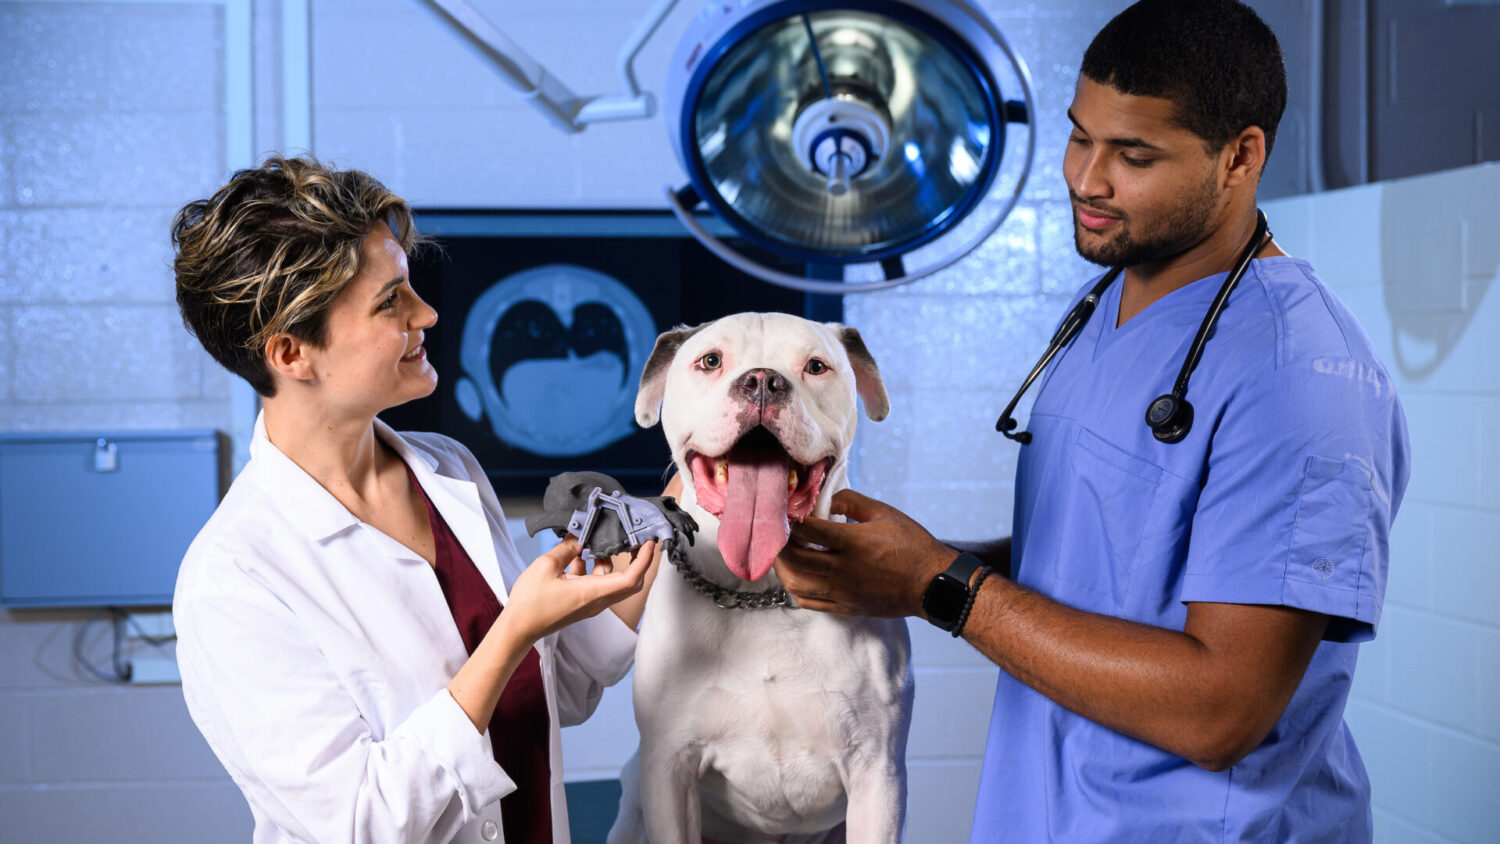 A happy canine is being examined at Vet Med.